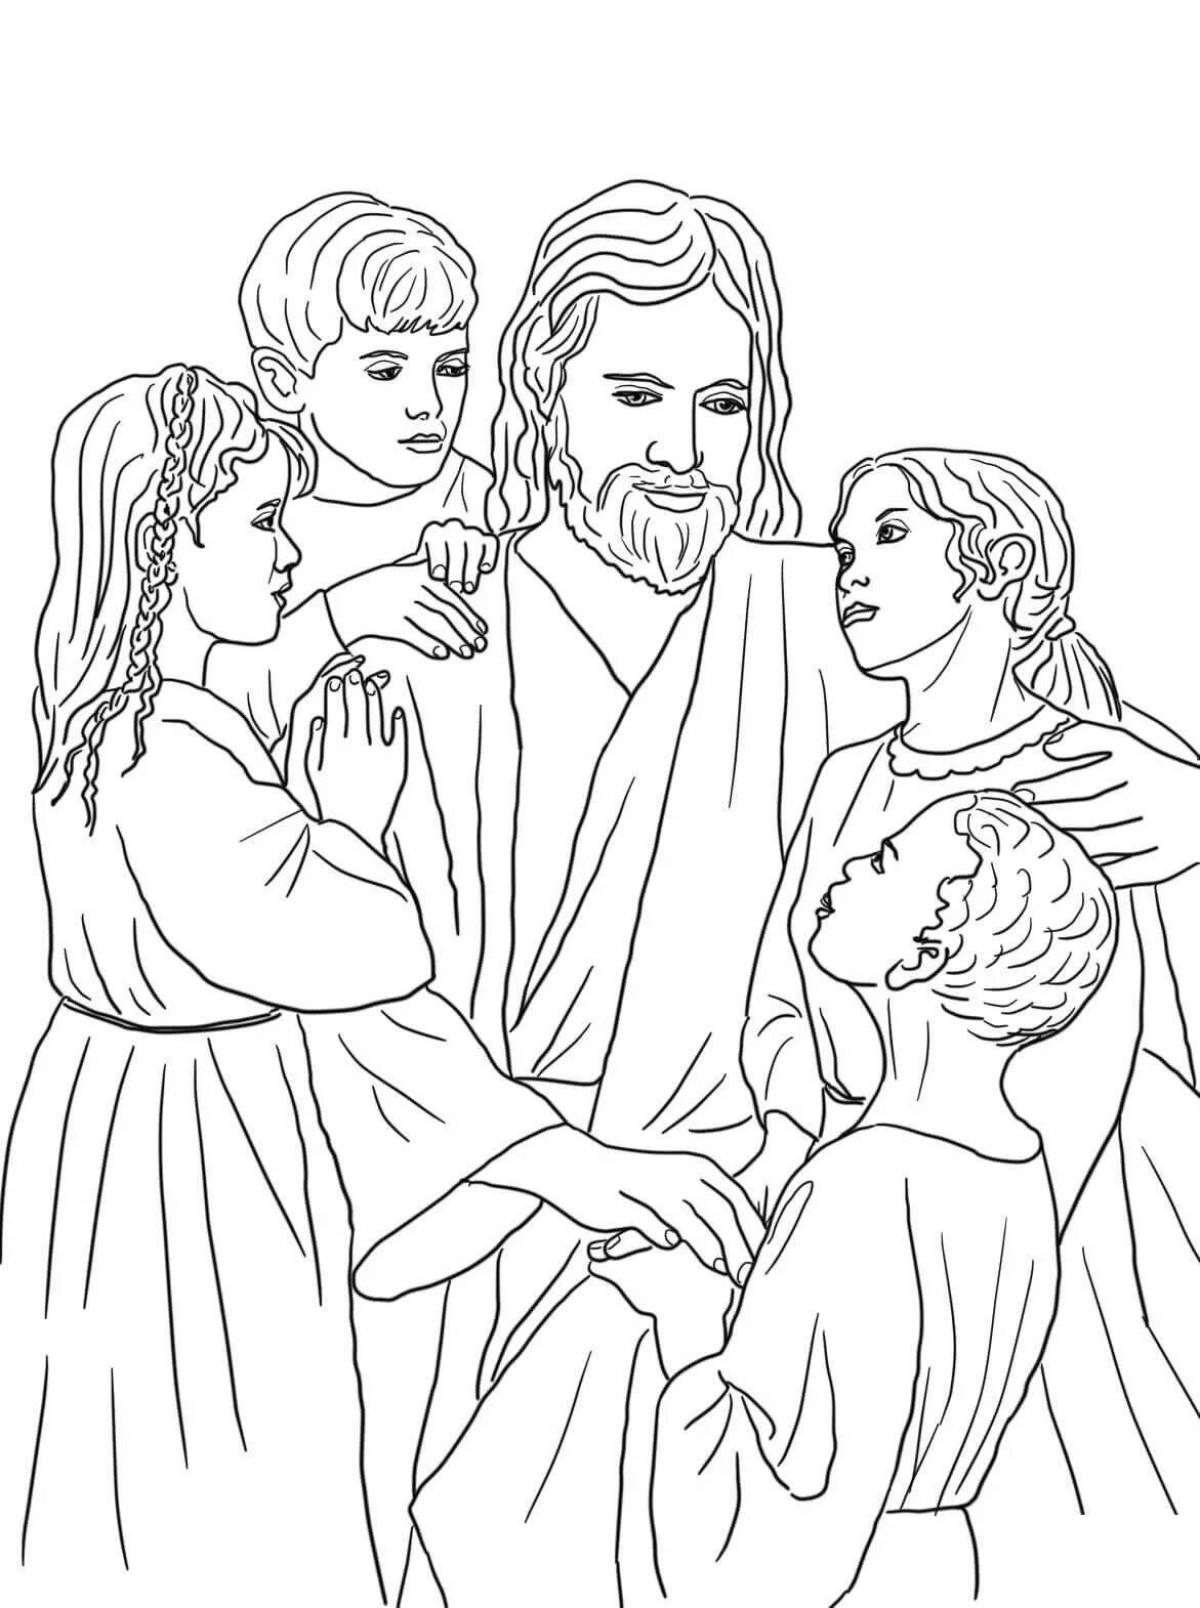 Charming christian coloring book